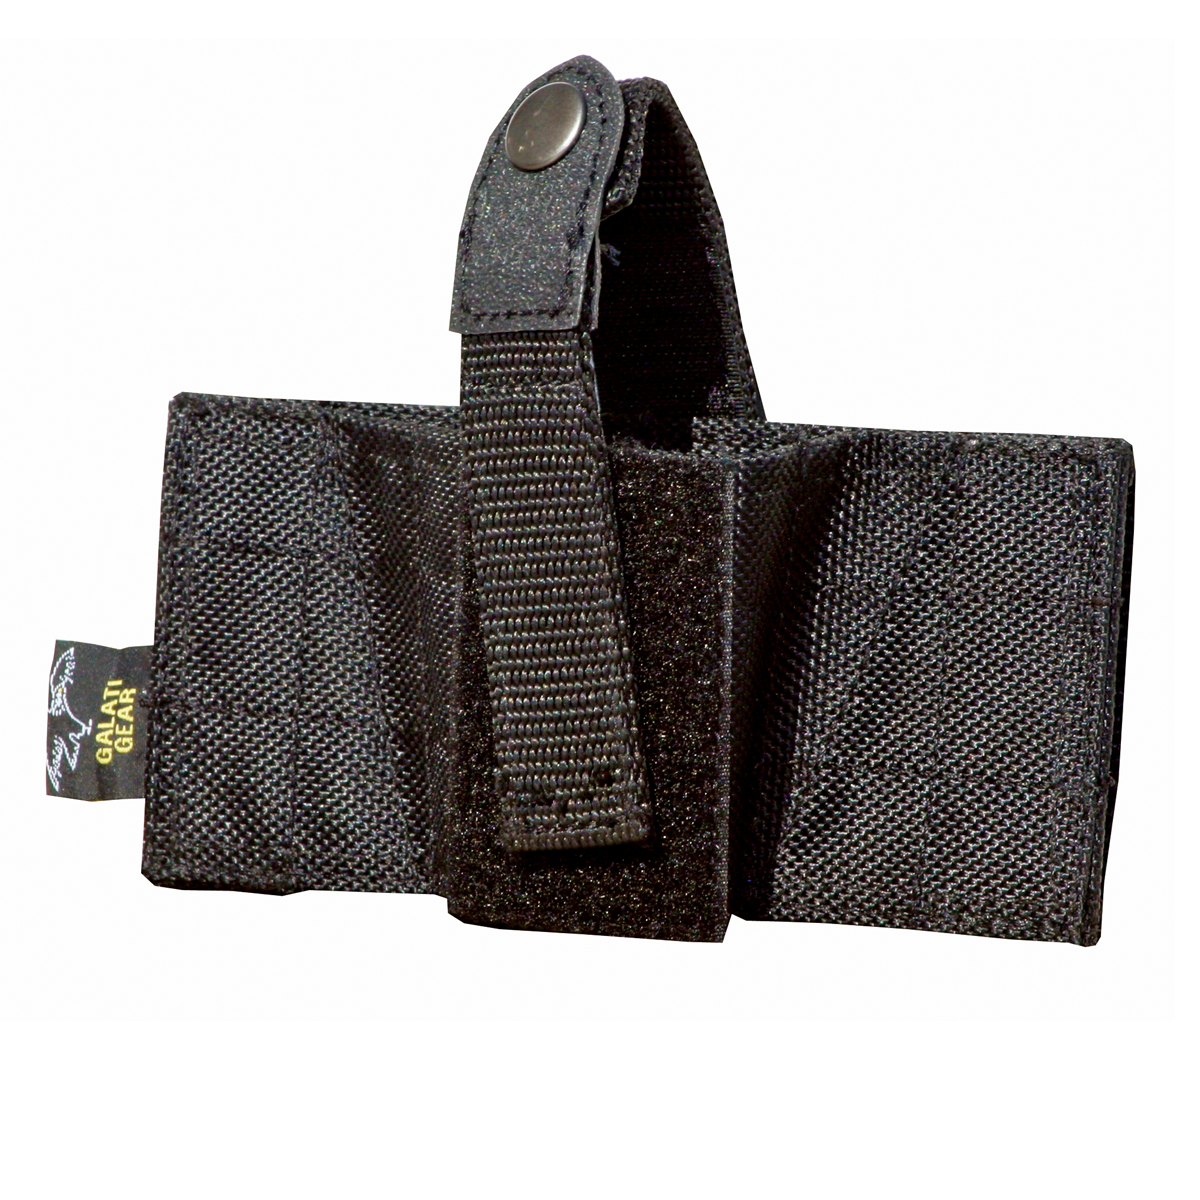 Shop Misc Holsters Now